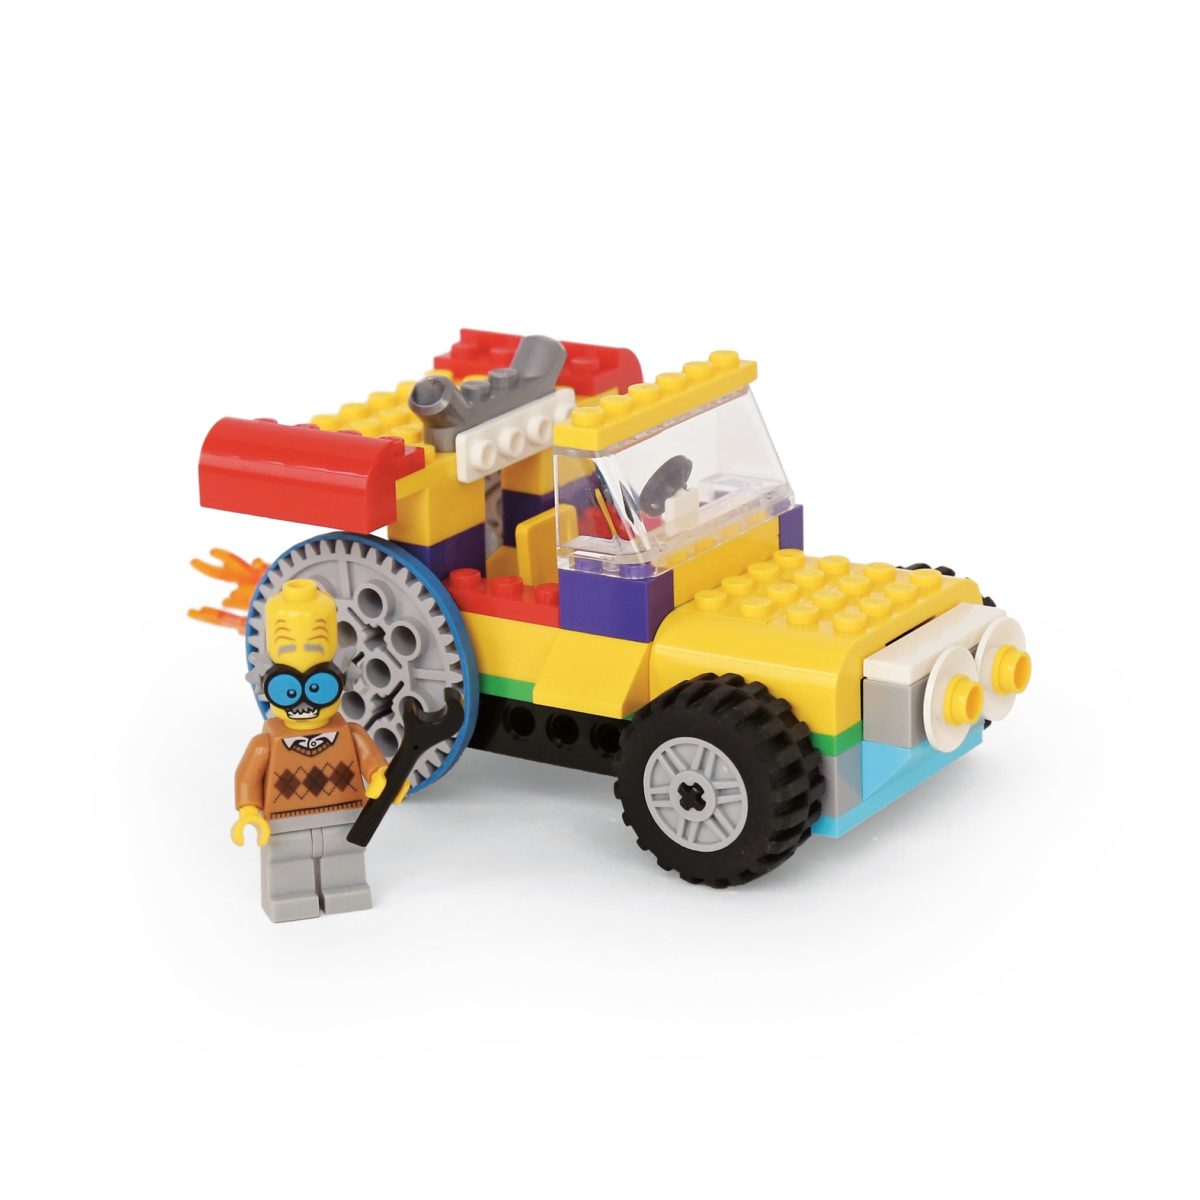 Genius LEGO Inventions with Bricks You Already Have: 40+ New Robots,  Vehicles, Contraptions, Gadgets, Games and Other Fun STEM Creations